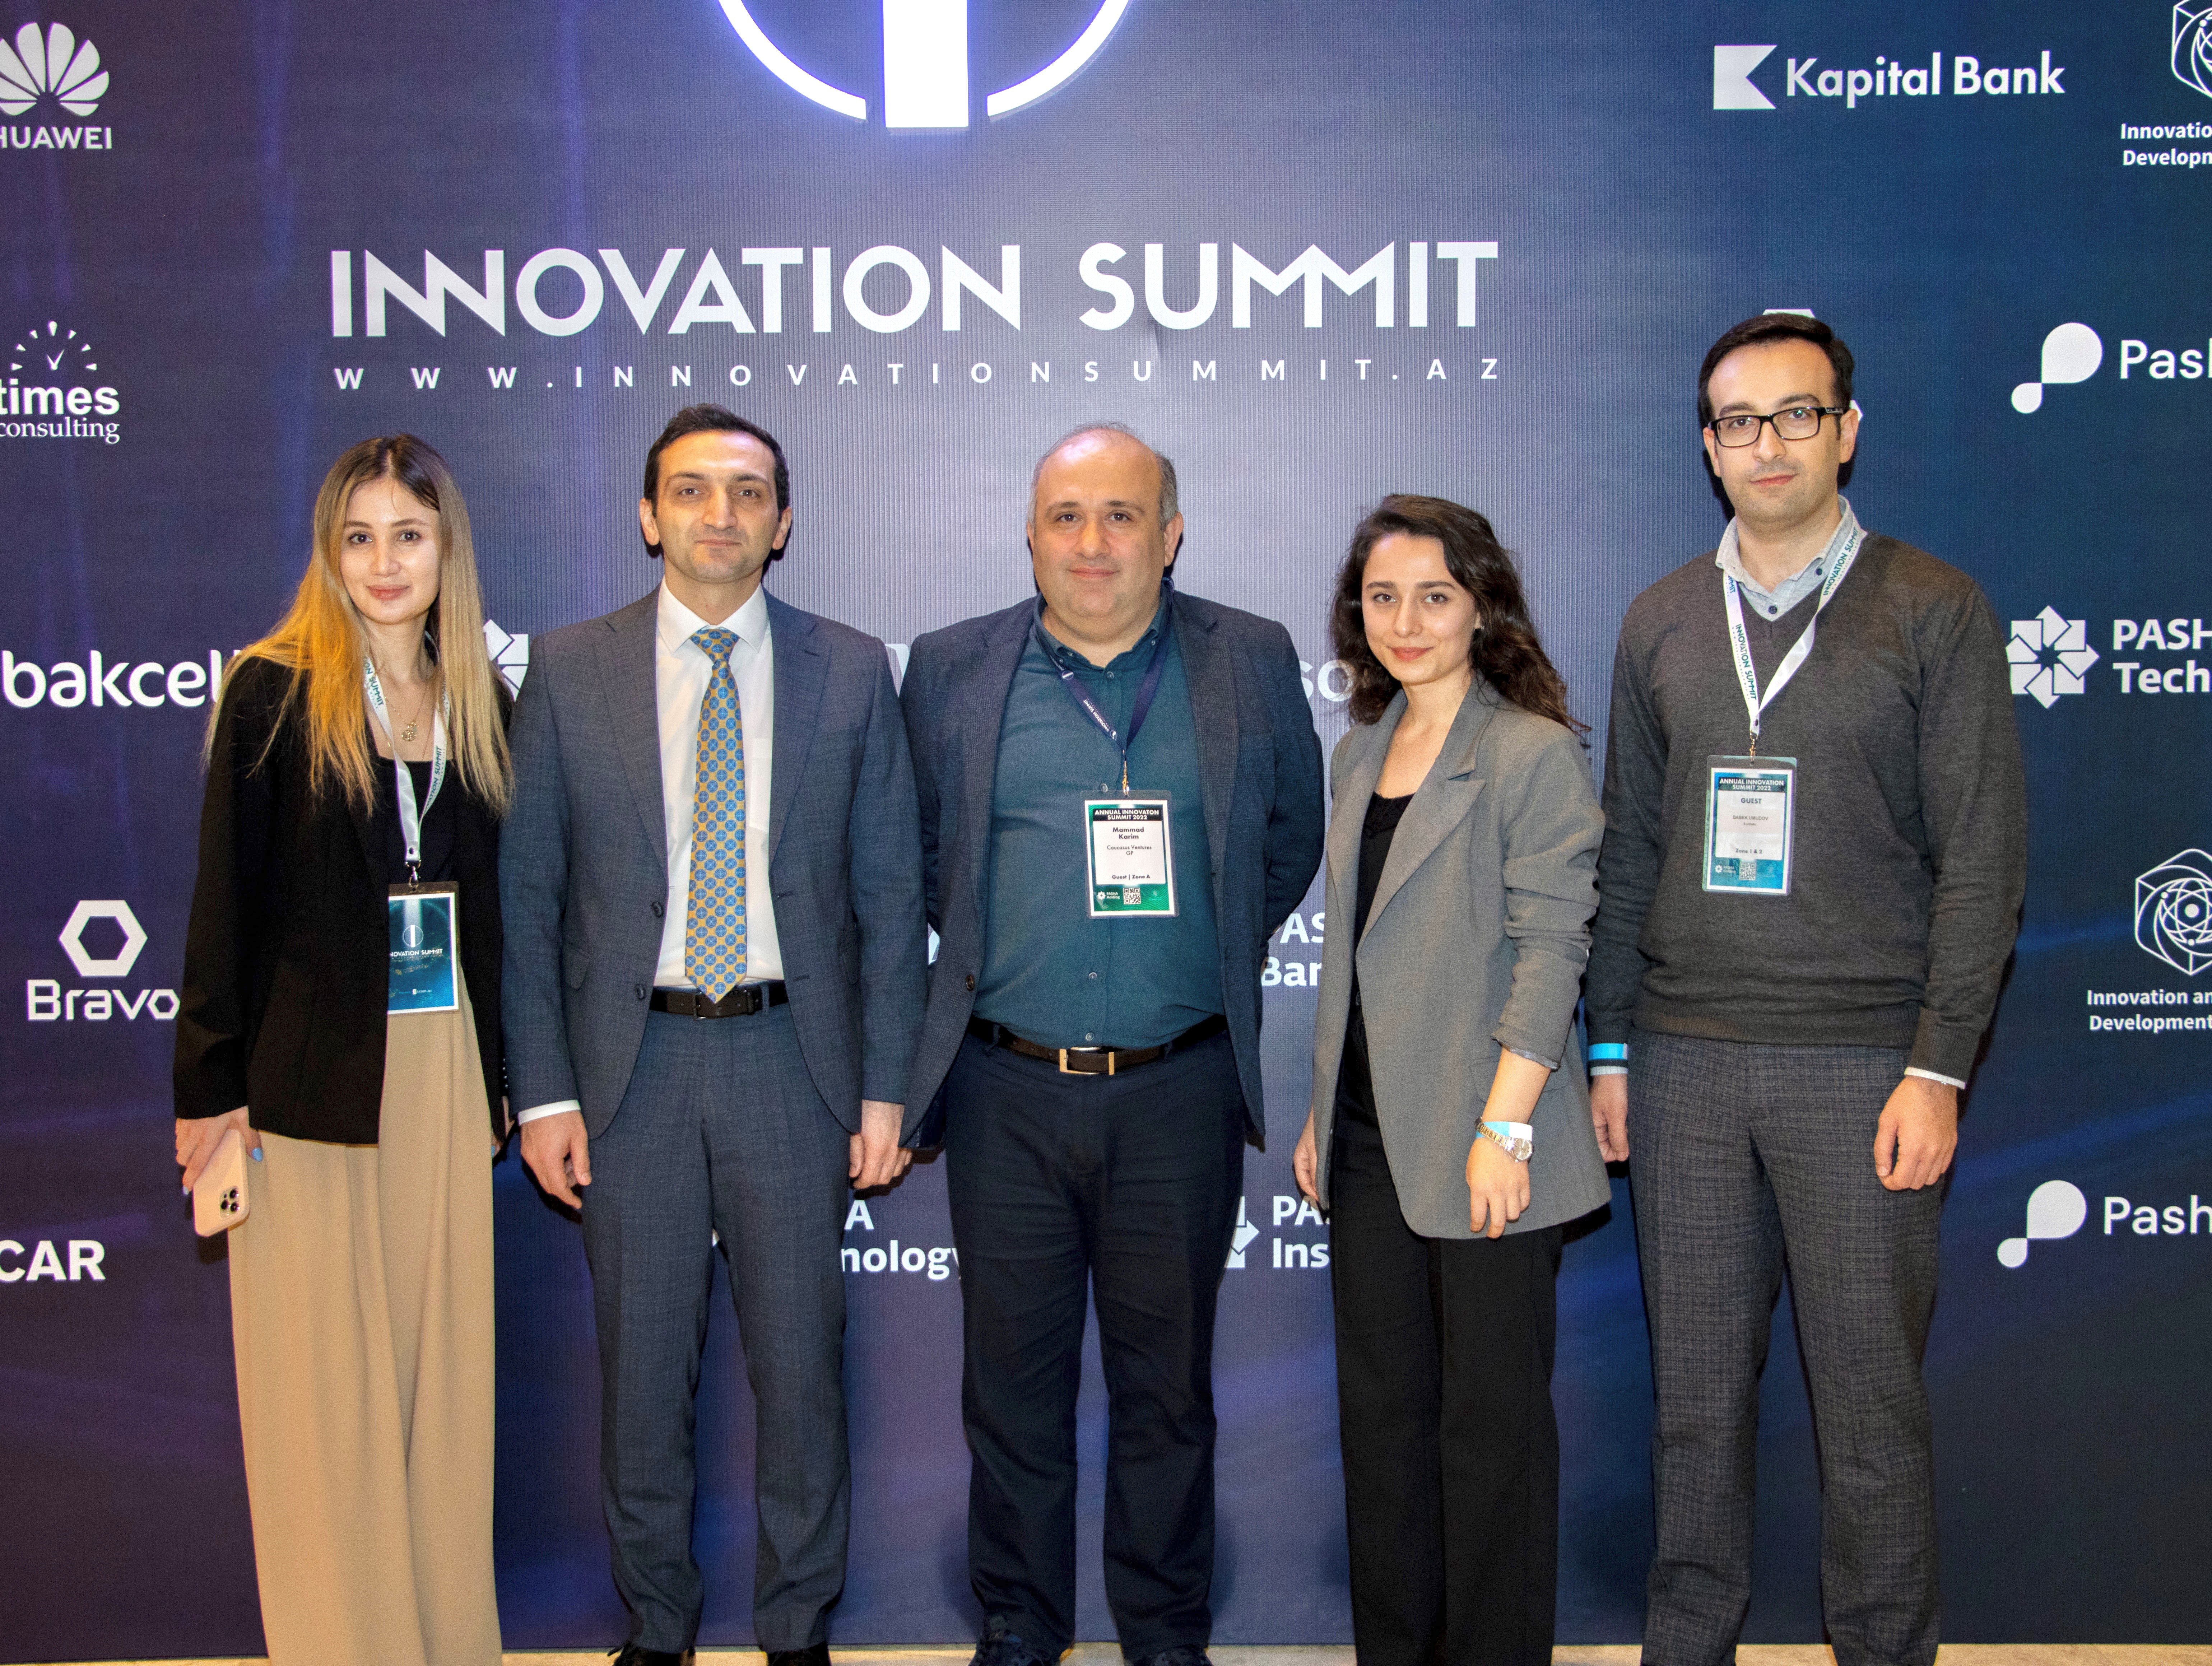 E-LEGAL participated in the Innovation Summit at the invitation of PASHA Holding!